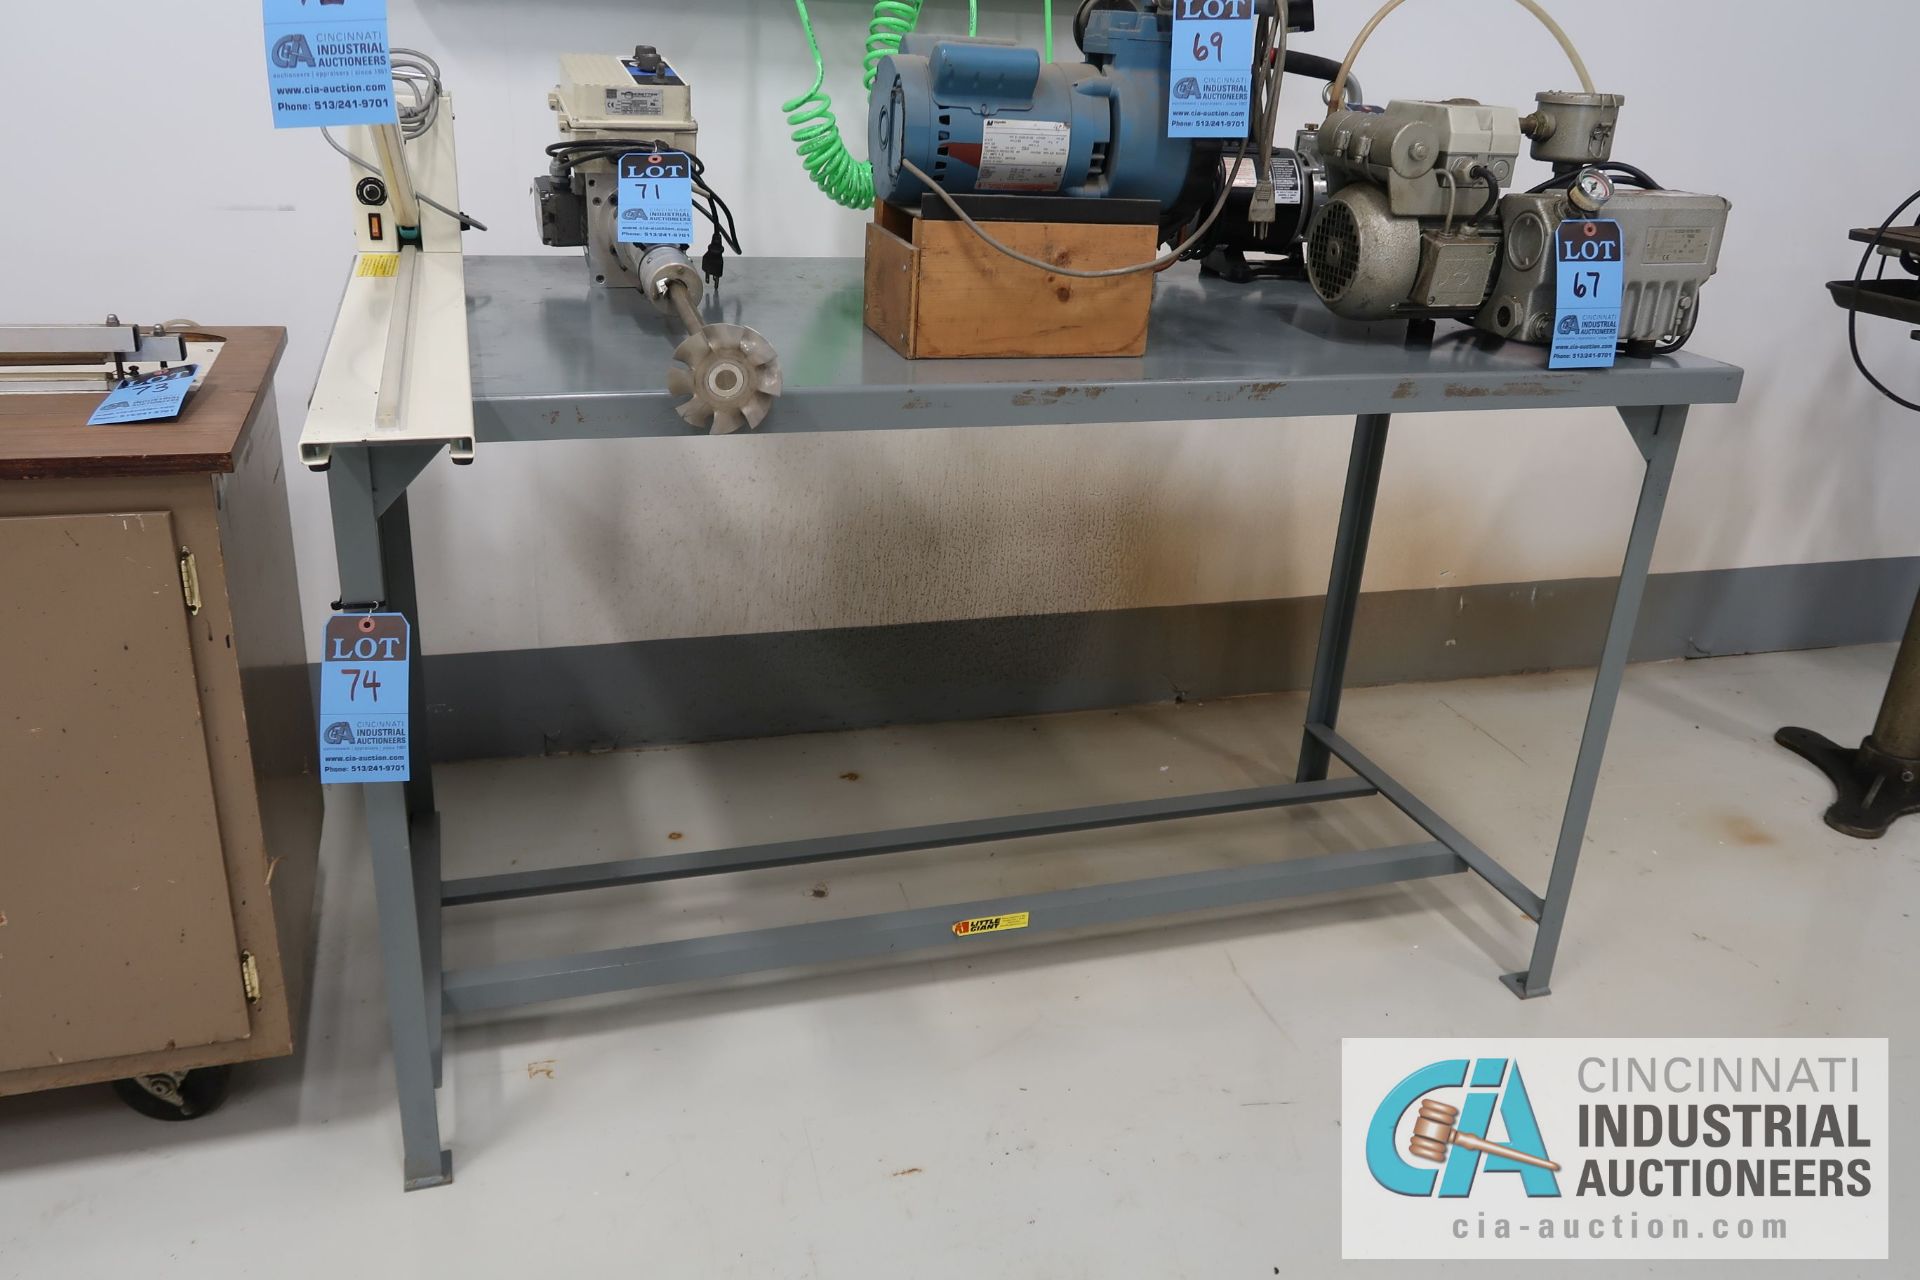 30" X 60" X 36" HIGH LITTLE GIANT STEEL WORK BENCH **DELAYED REMOVAL - PICKUP 11-15-19**